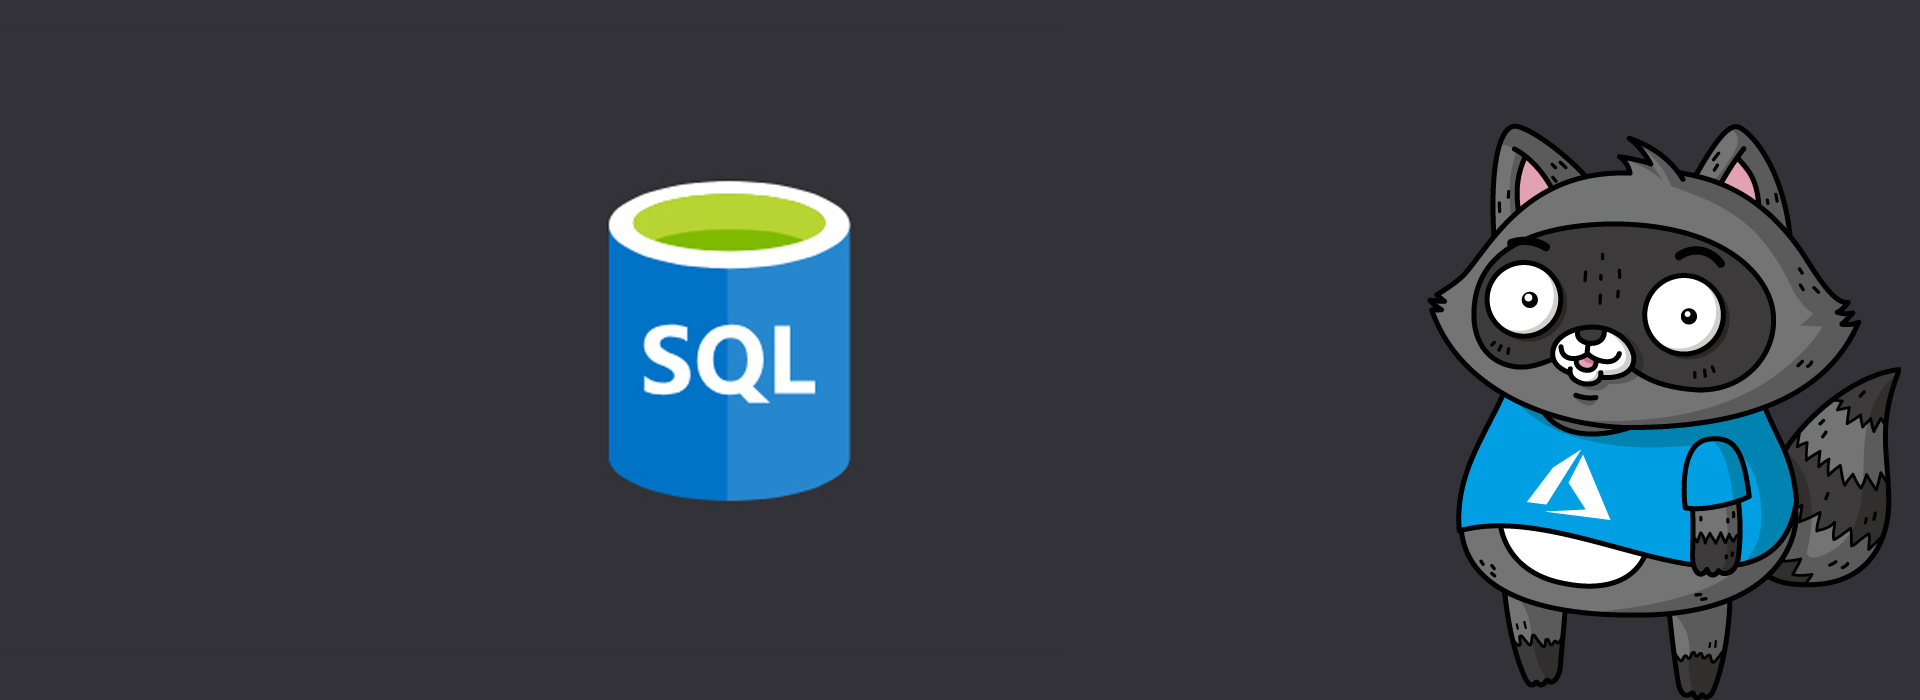 A SQL icon, next to a picture of Bit the Raccoon.